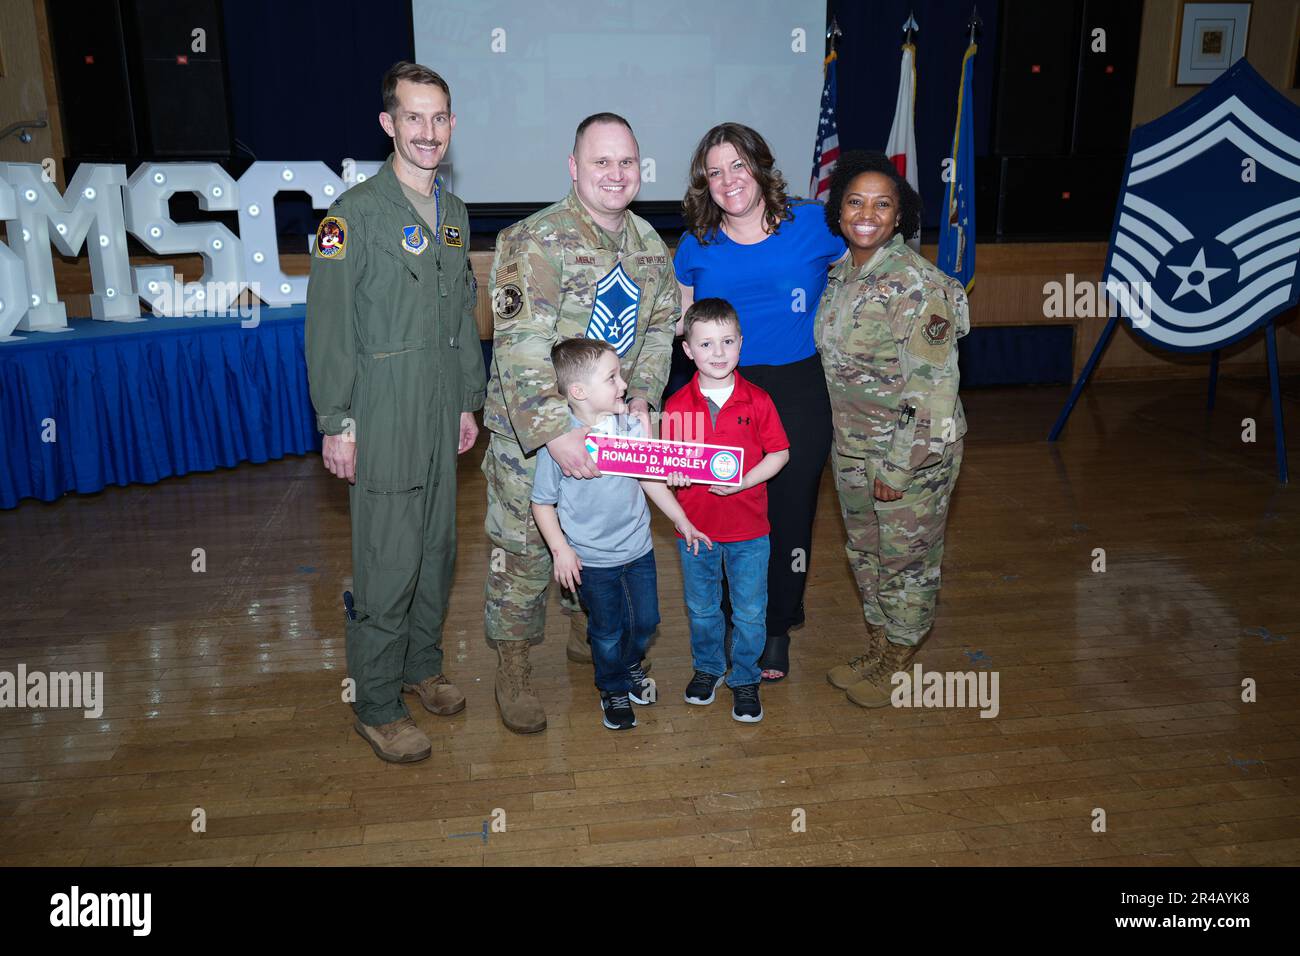 U.S. Air Force Col. Michael P. Richard, 35th Fighter Wing commander, and Chief Master Sgt. Cheronica Blandburg, 35th FW command chief, pose for a photo with Master Sgt. Ronald Mosley, 35th Maintenance Squadron, and his family during an E-8 release party at Misawa Air Base, Japan, March 23, 2023. Air Force officials selected 1,629 master sergeants for promotion to senior master sergeant, out of 16,031 eligible, for a selection rate of 10.16 percent in the 23E8 promotion cycle. Stock Photo